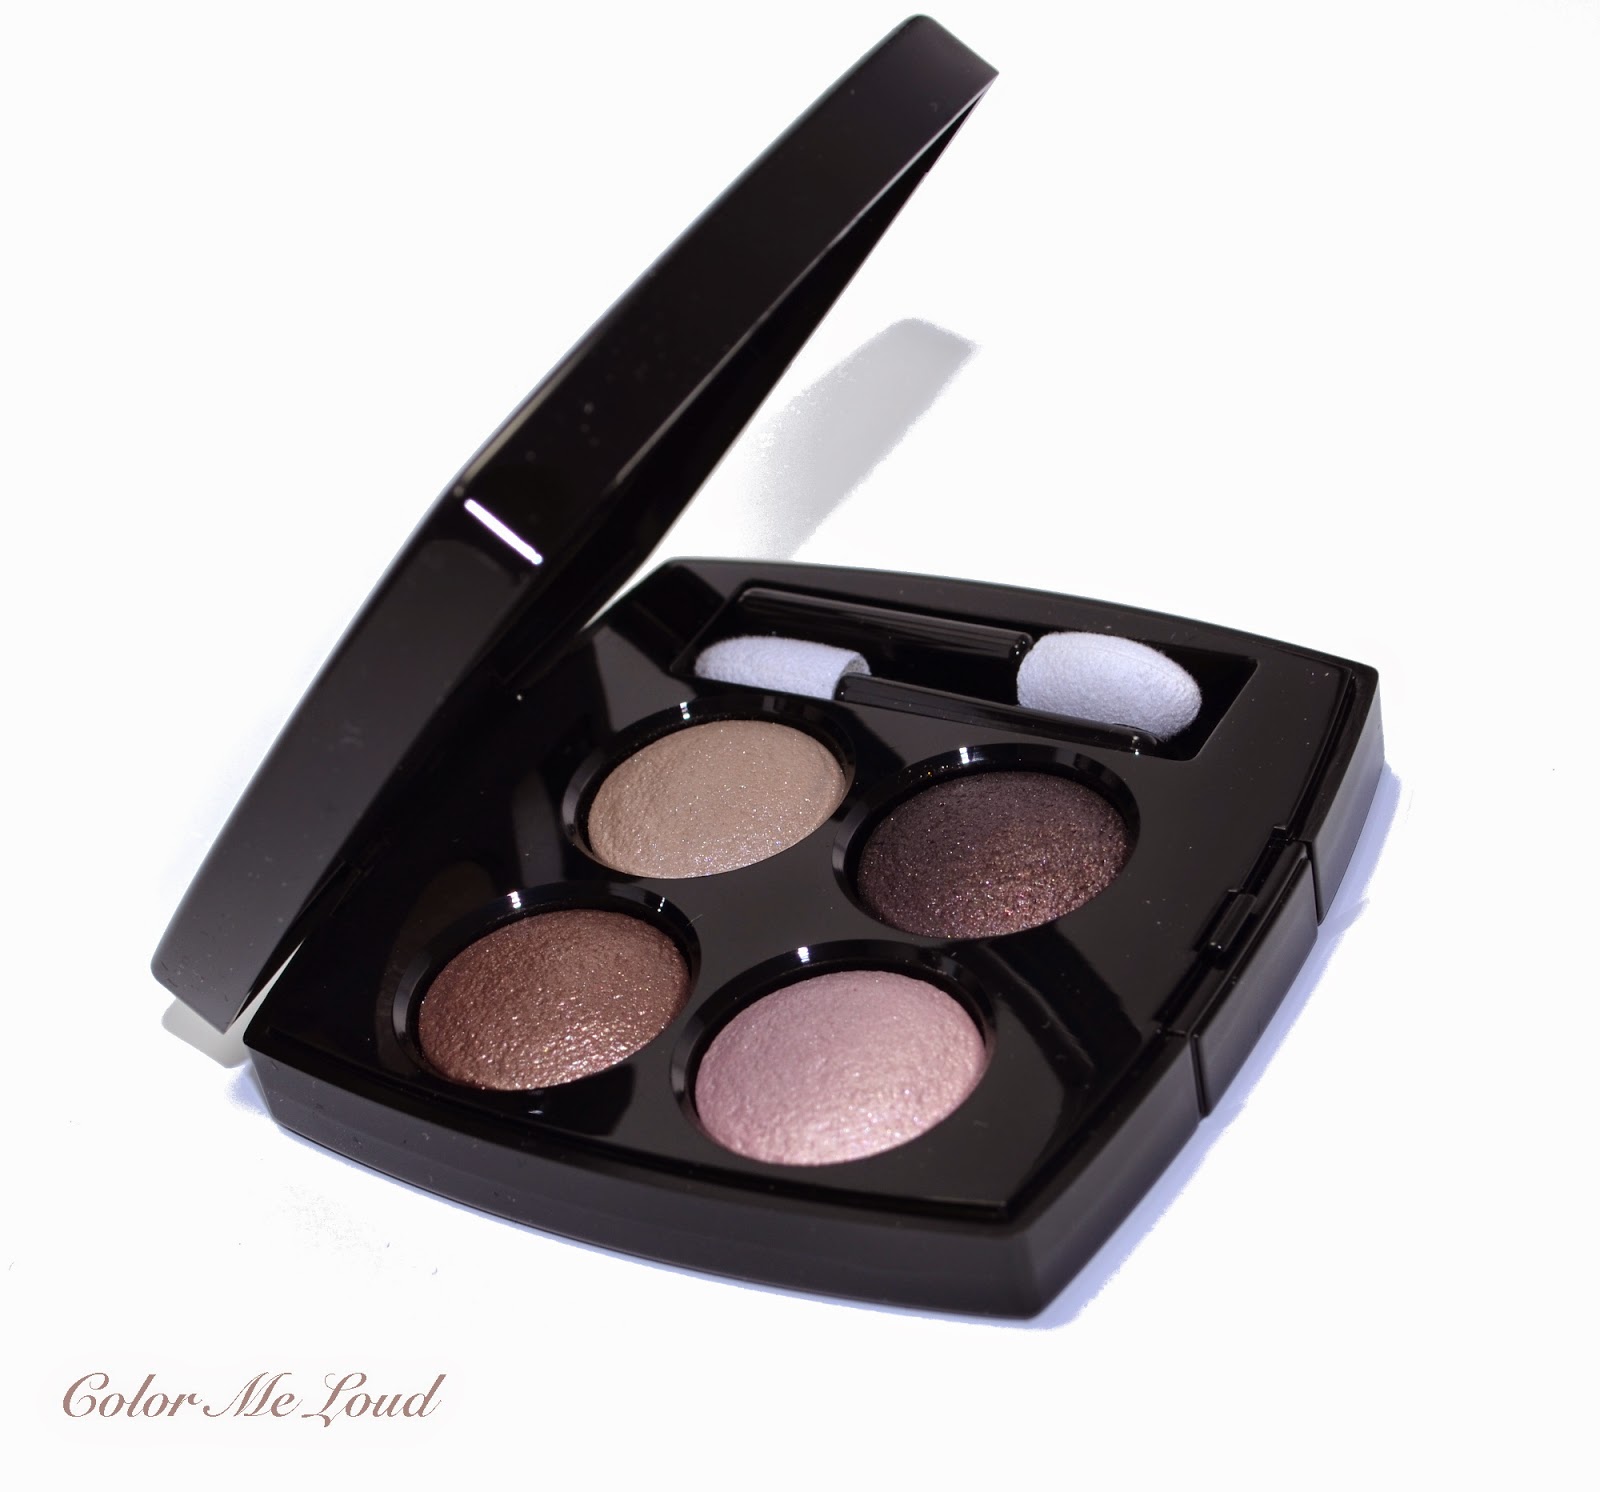 CHANEL Les 4 Ombres Multi-Effect Quadra Eyeshadow: A quick review